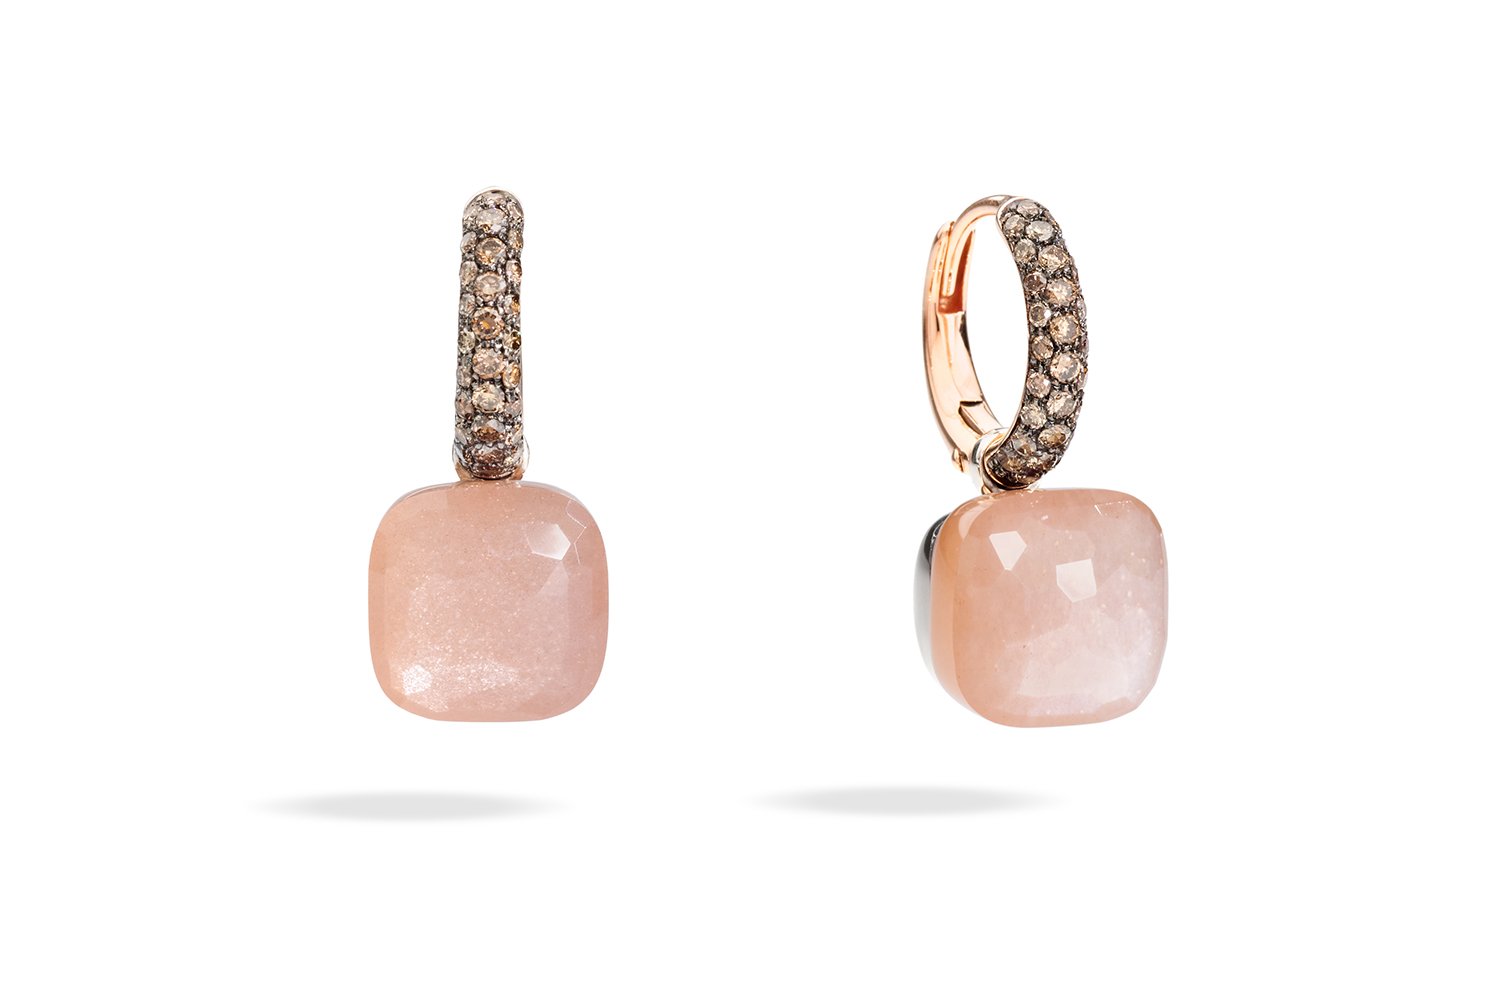 NUDO-CHOCOLATE-earrings-in-rose-gold-with-light-brown-moonstone-and-brown-diamonds-by-Pomellato-–-kopia